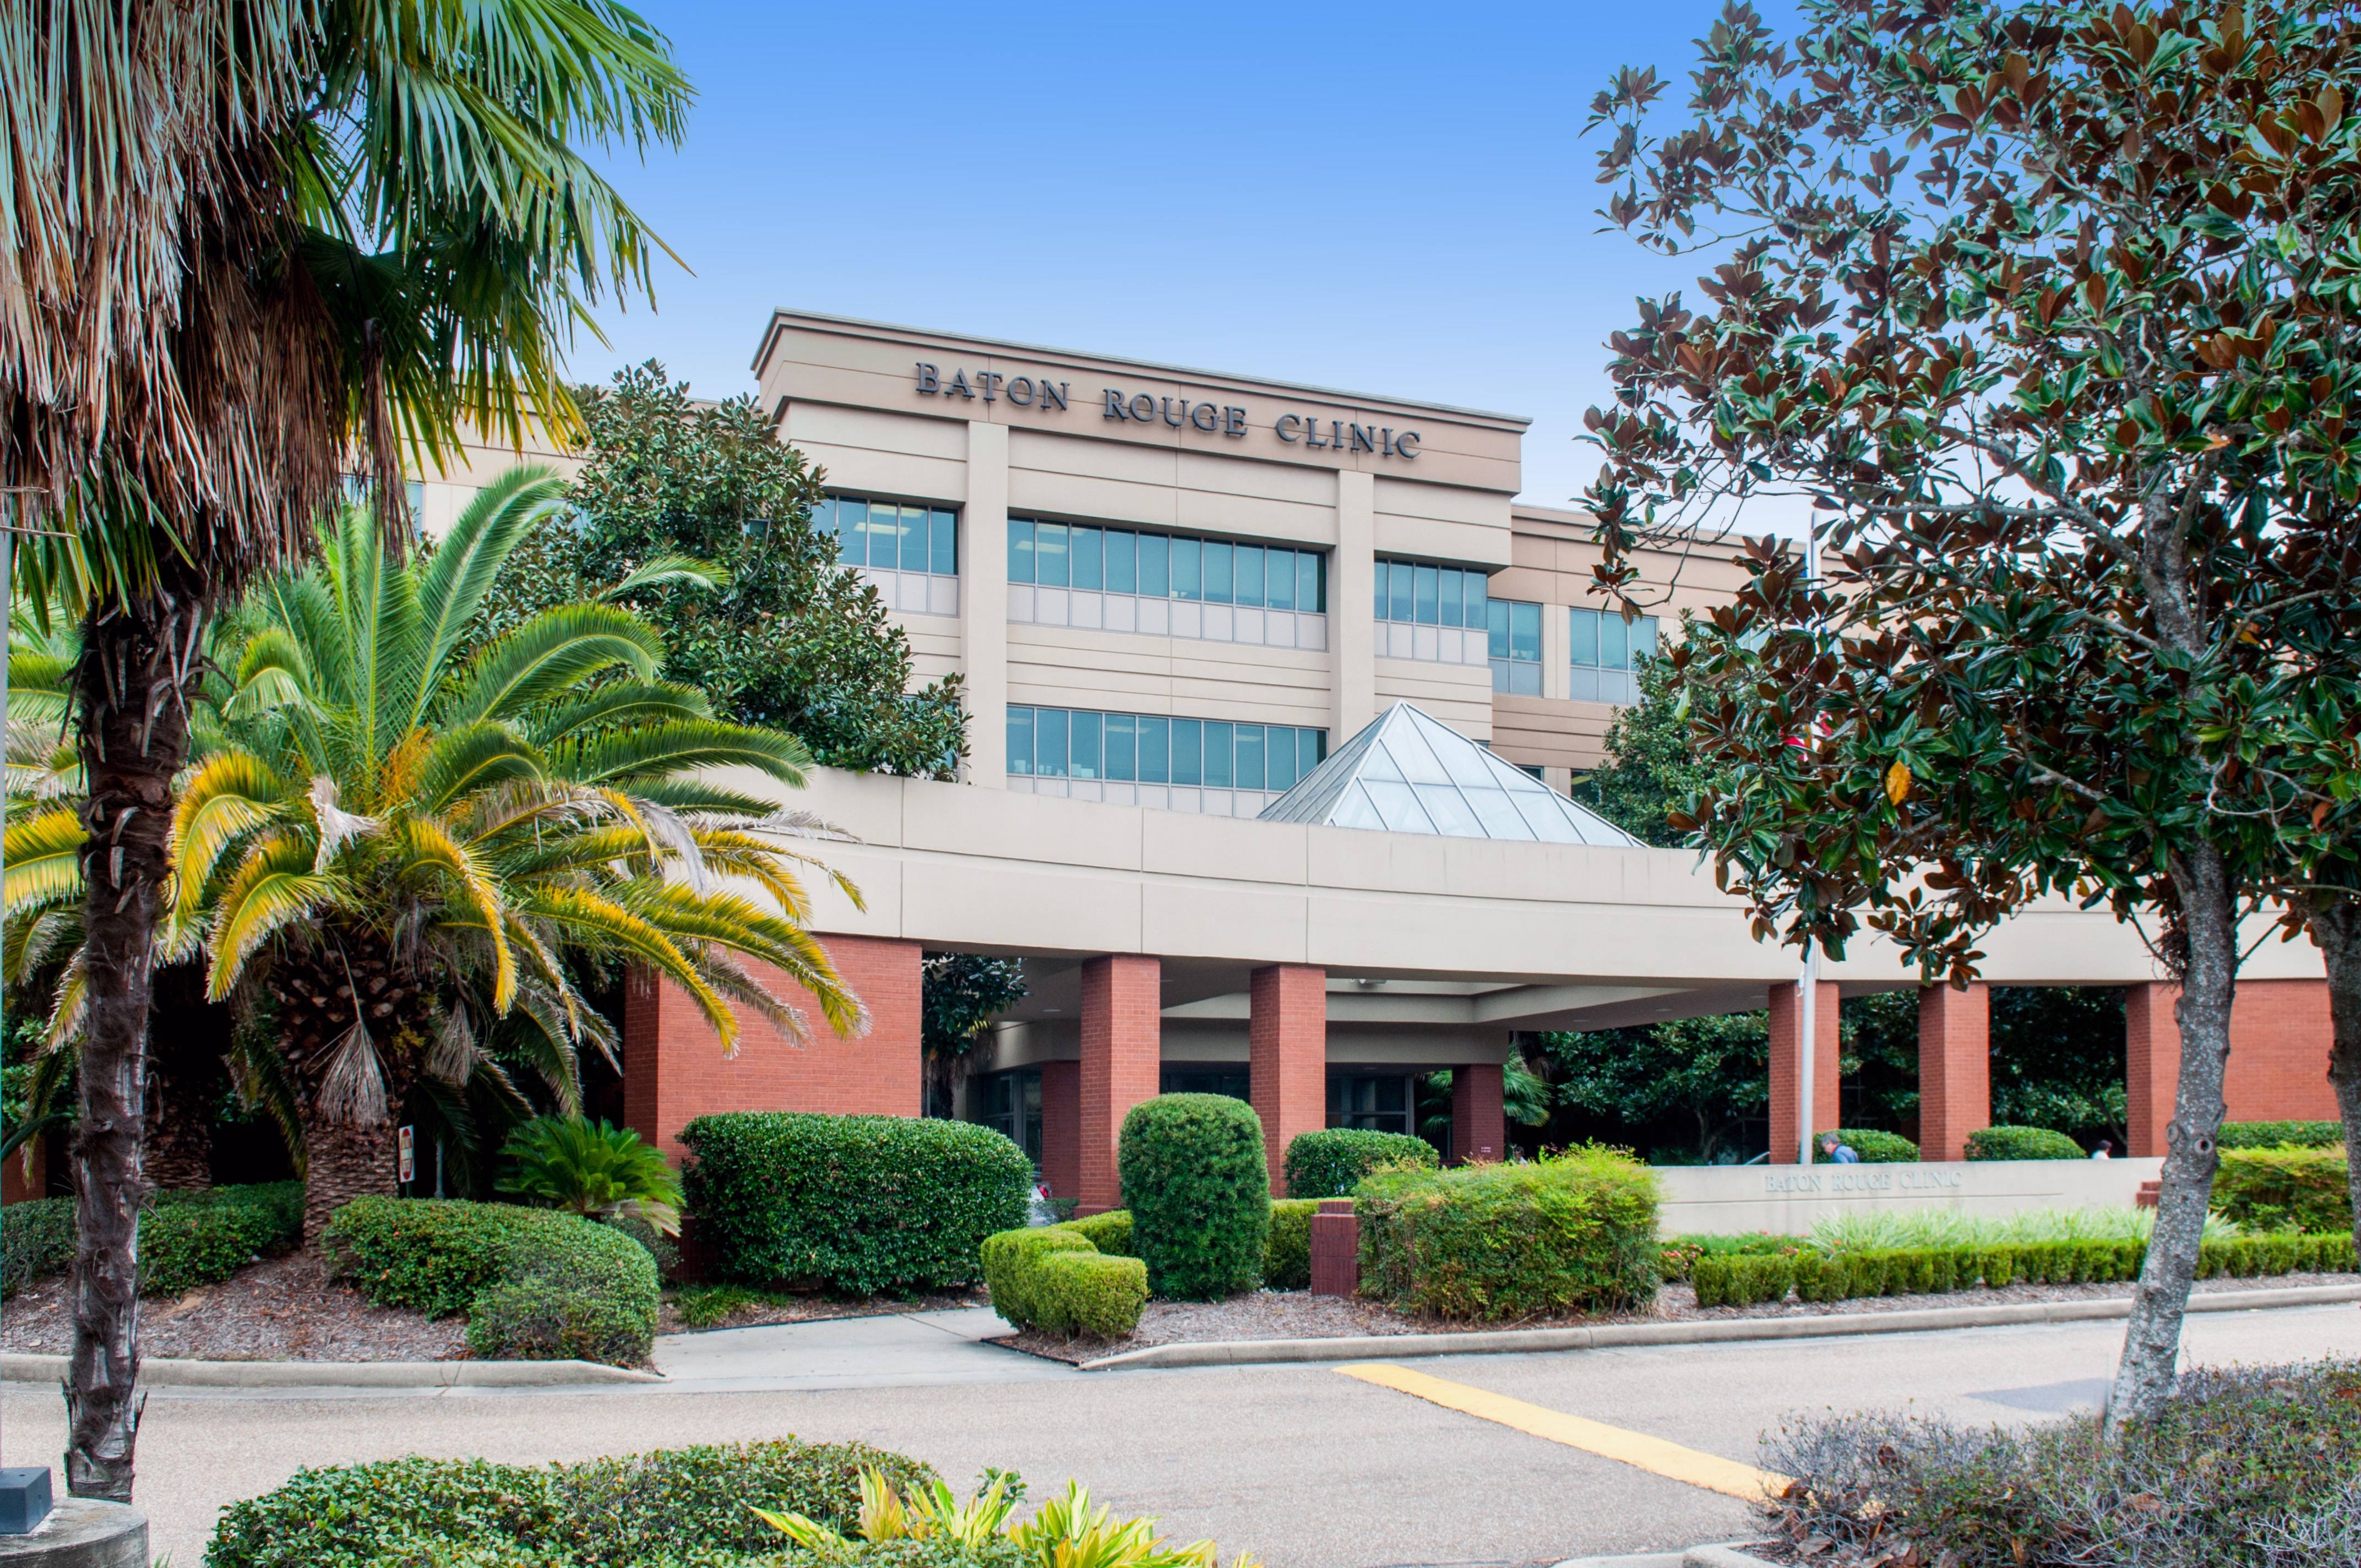 exterior image of the Baton Rouge Clinic